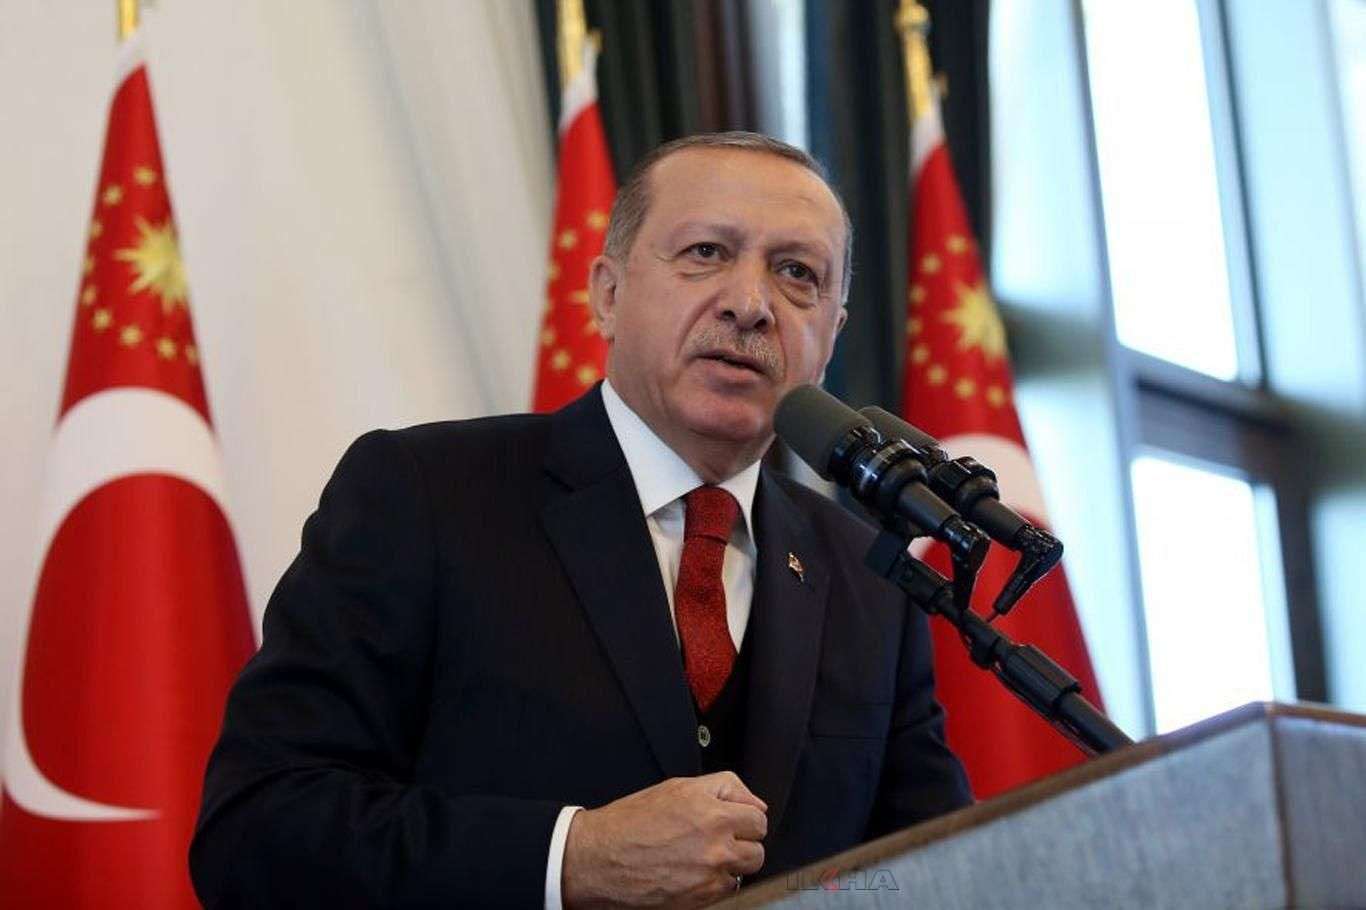 Turkish president condemns recent attacks on the Quran in several European countries